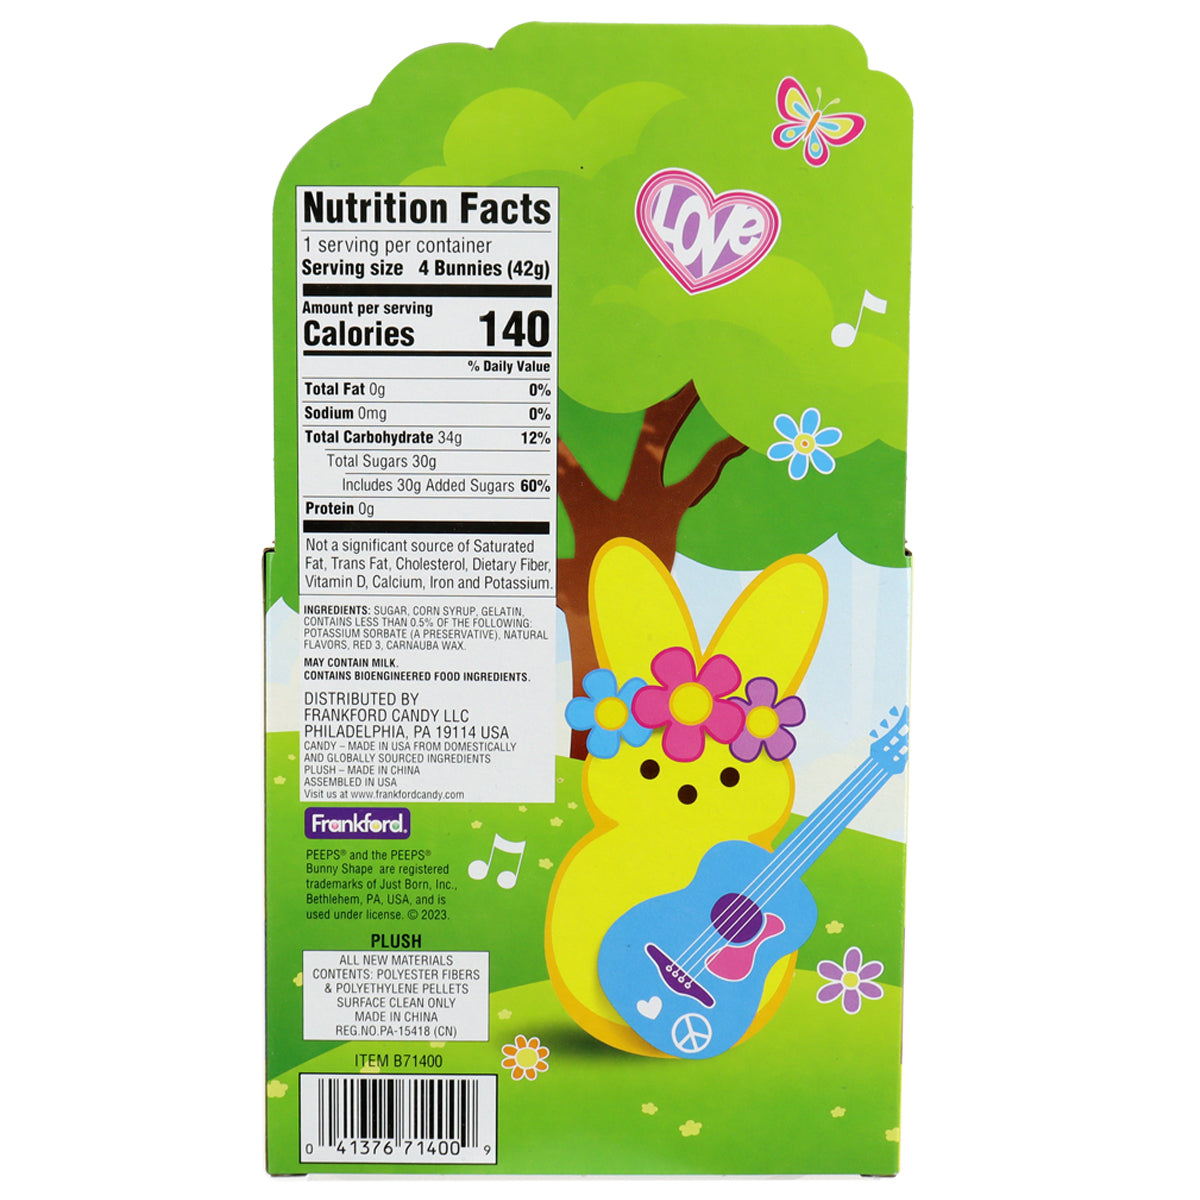 back of green Easter themed box with nutrition facts and ingredients